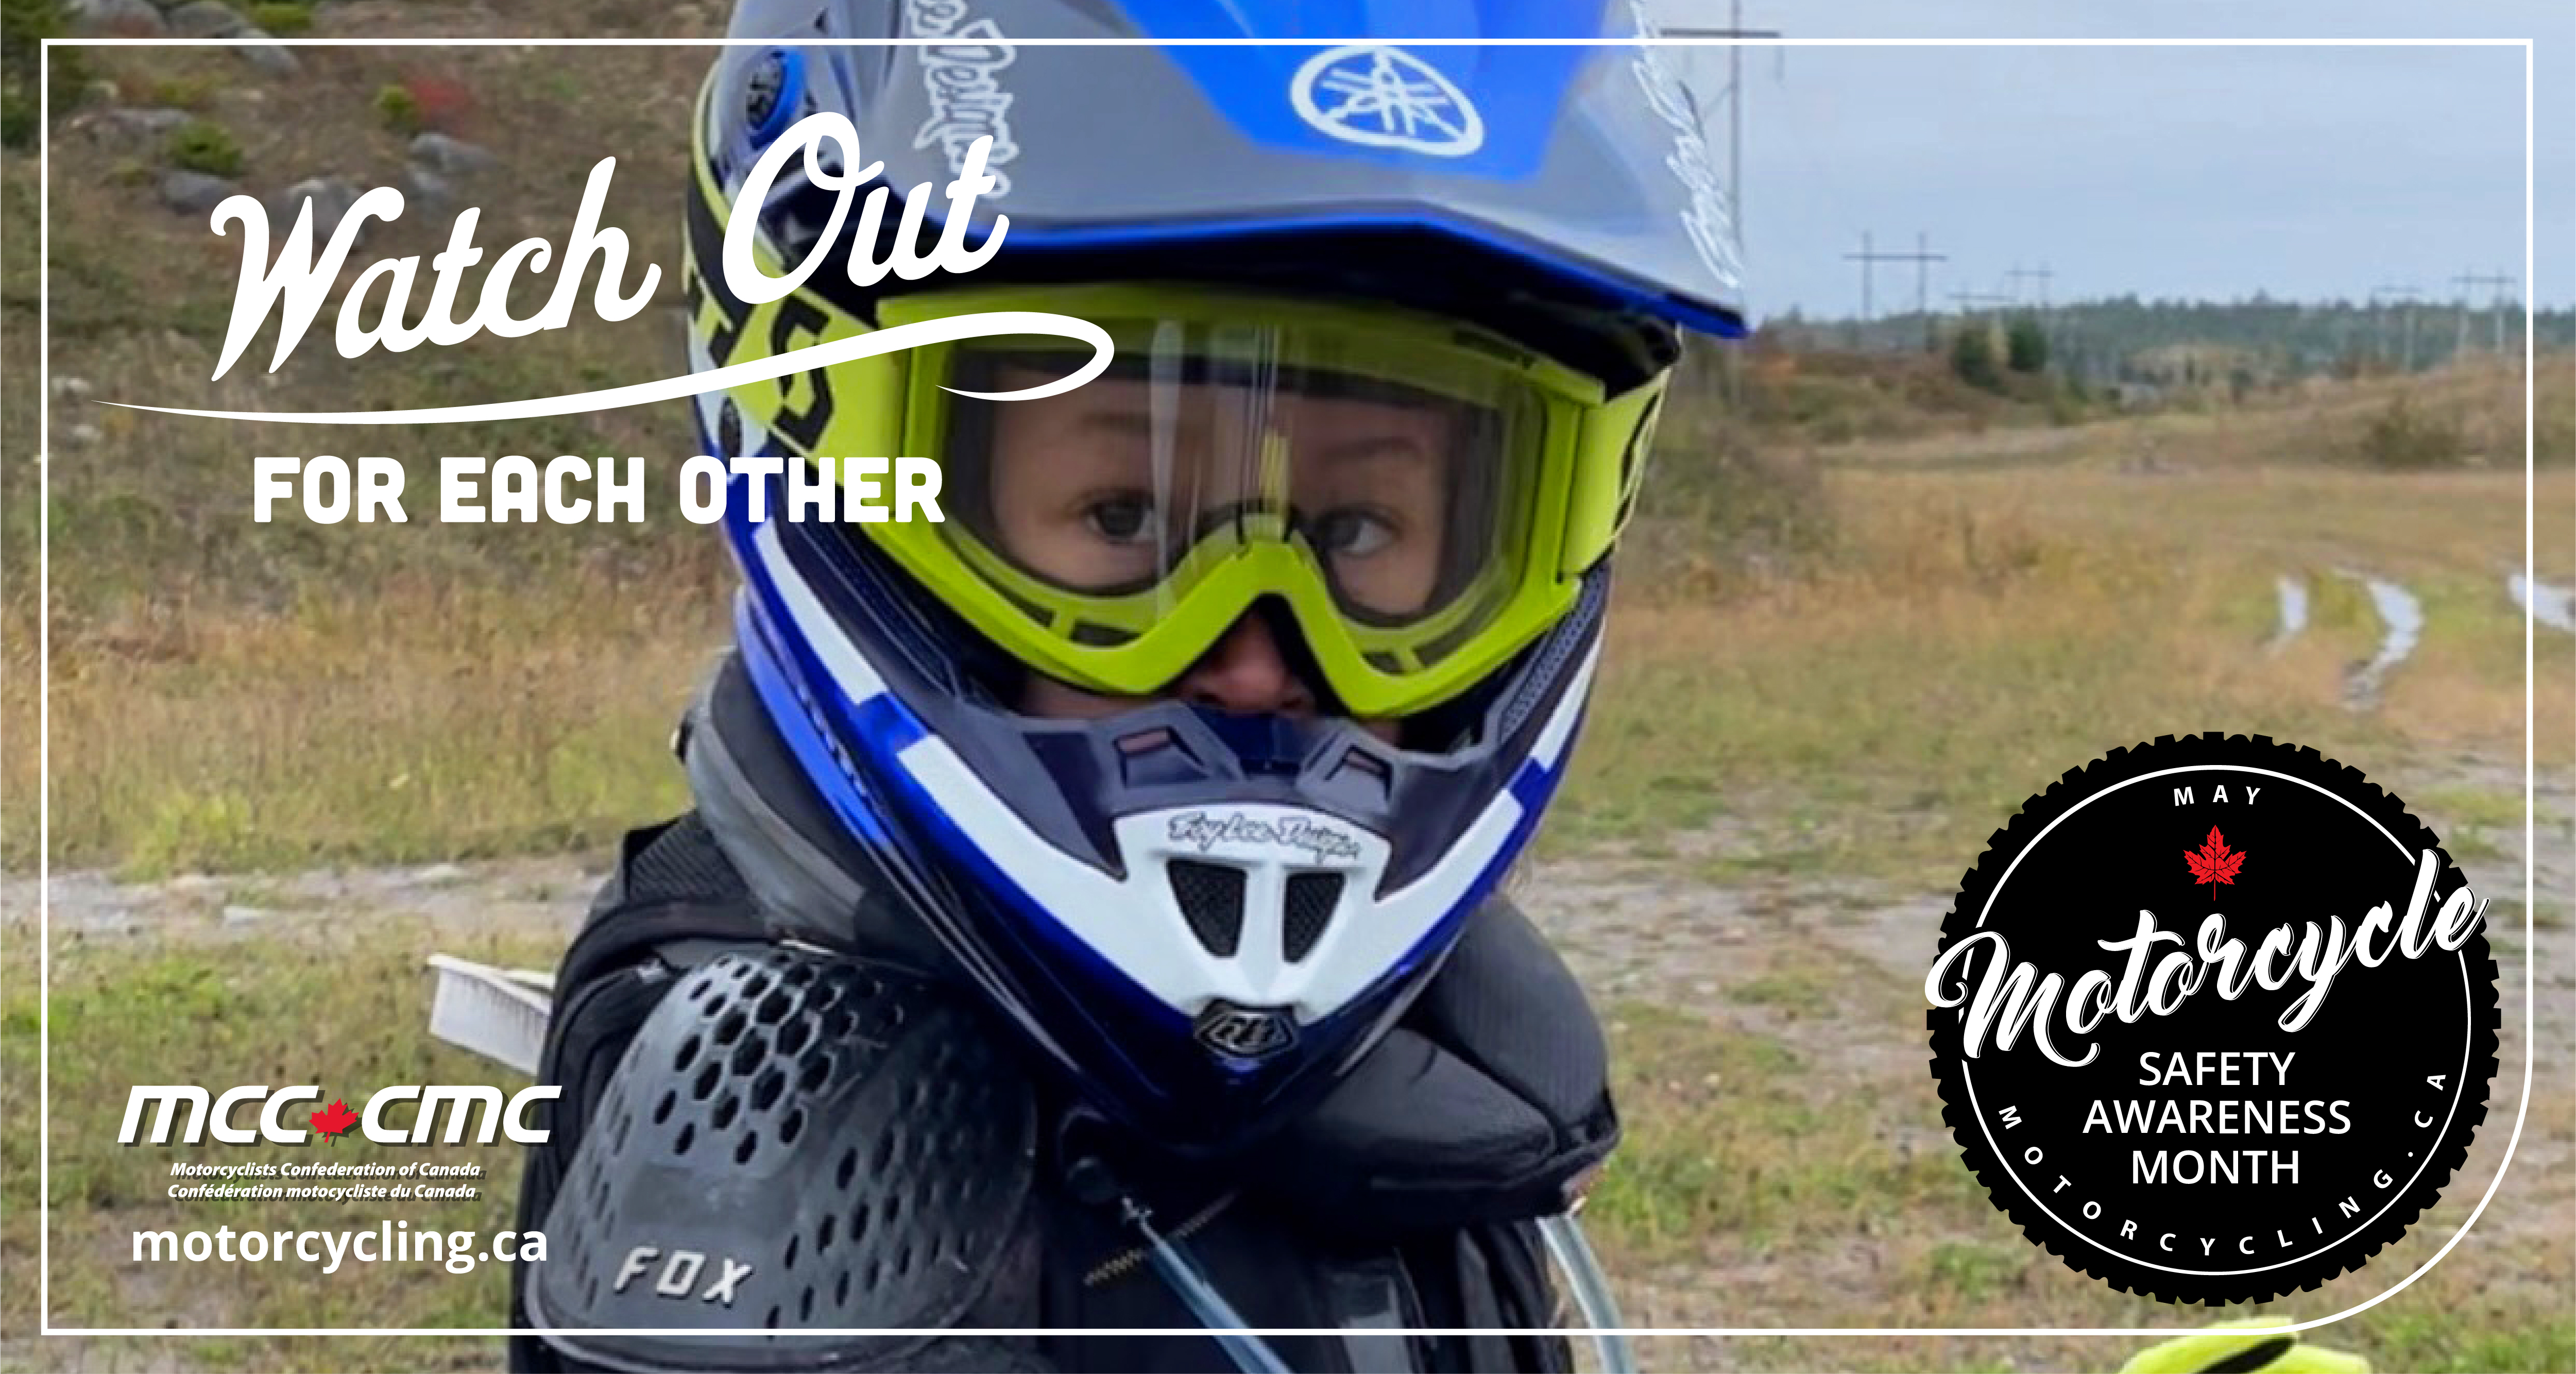 Evelyn Kelly wearing dirt bike fear with message - Watch out for each other